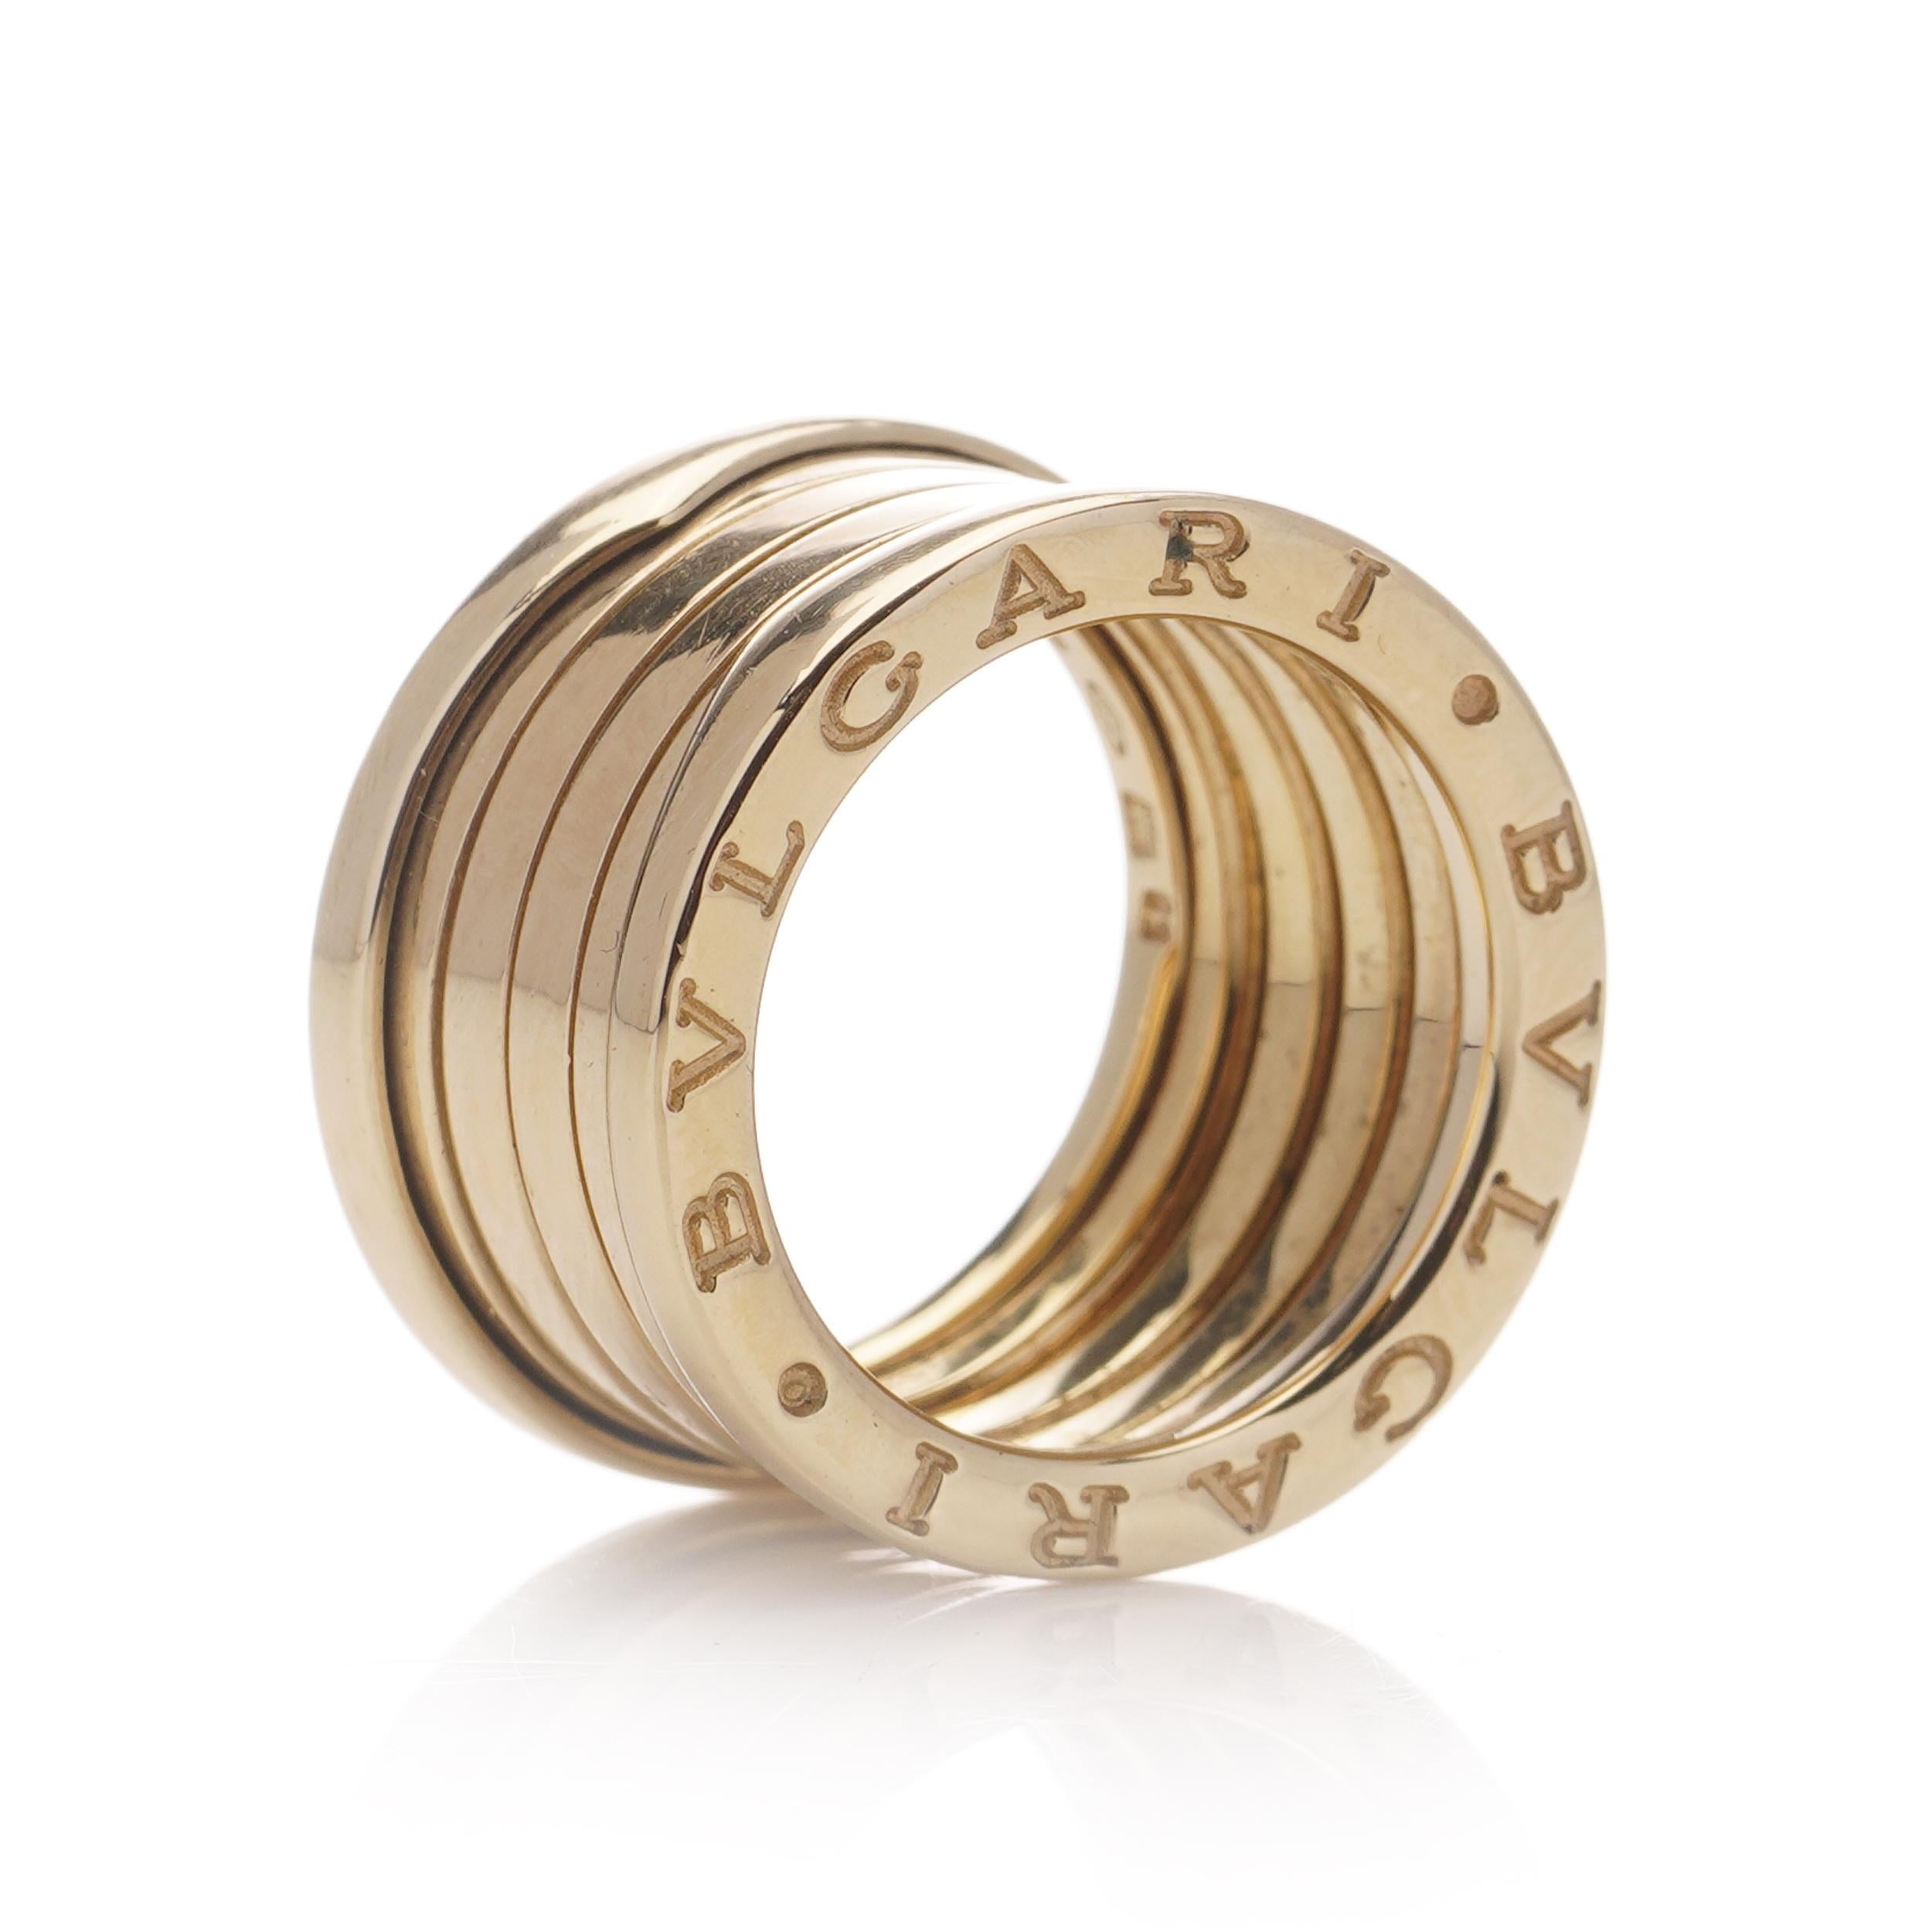 Bvlgari B. Zero1 18kt yellow gold band ring.
Made in Italy, Circa 1990's
Fully hallmarked.

Dimensions -
Finger Size : (UK) = J (US) = 5 (EU) = 50
Diameter x Width: 2.2 x 1.2 cm
Weight : 12 grams

Condition: Pre-owned, minor wear from general usage,